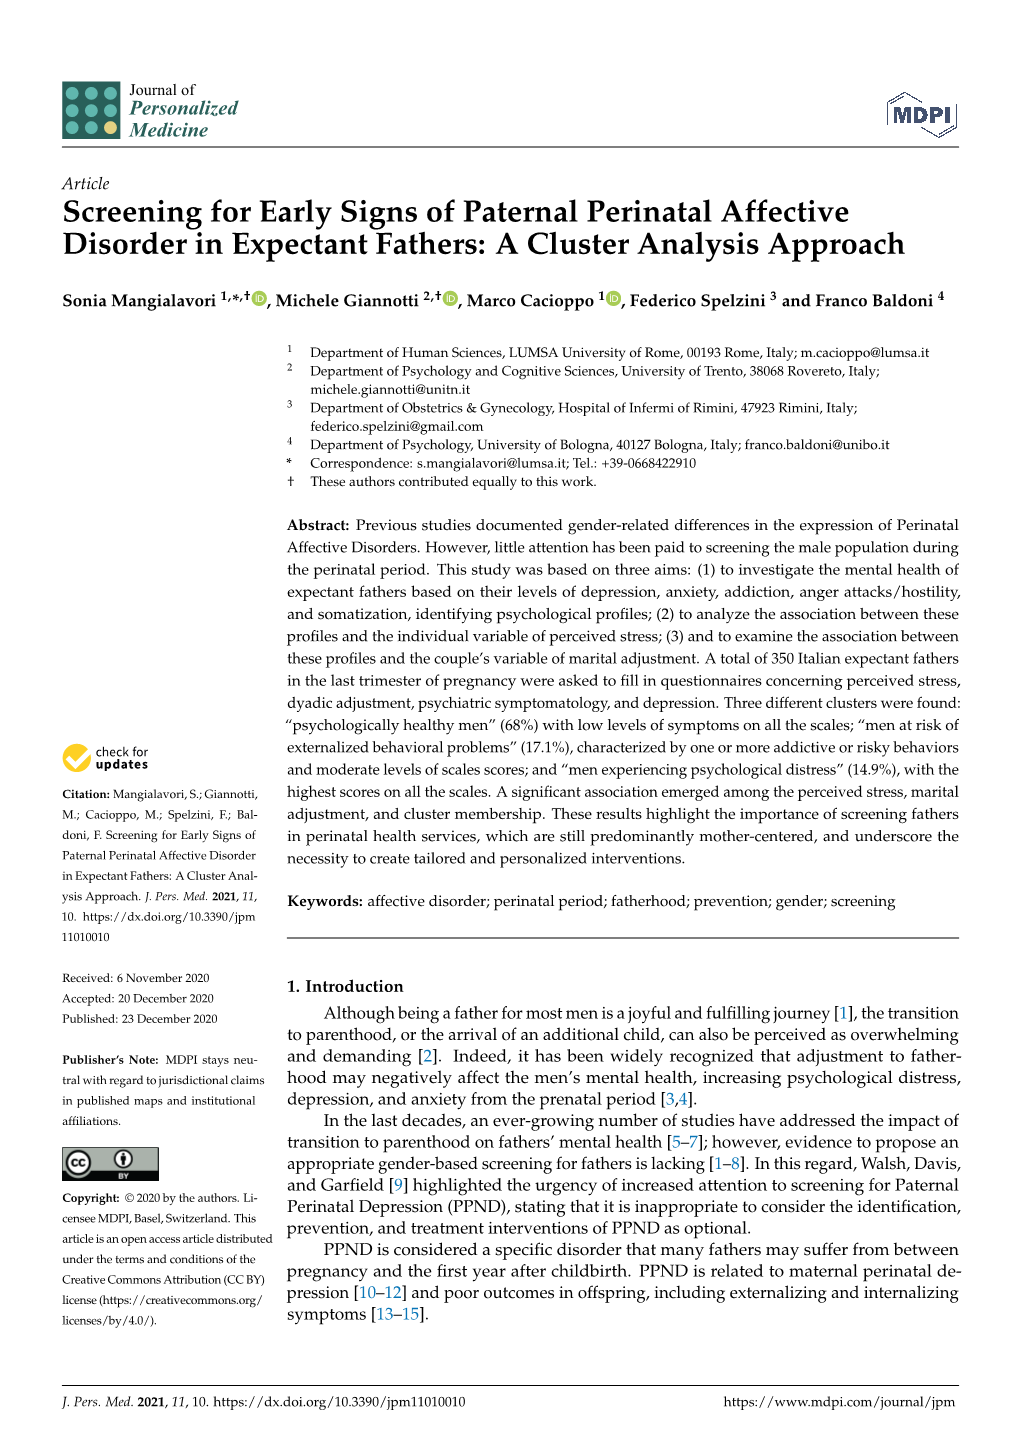 Screening for Early Signs of Paternal Perinatal Affective Disorder in Expectant Fathers: a Cluster Analysis Approach